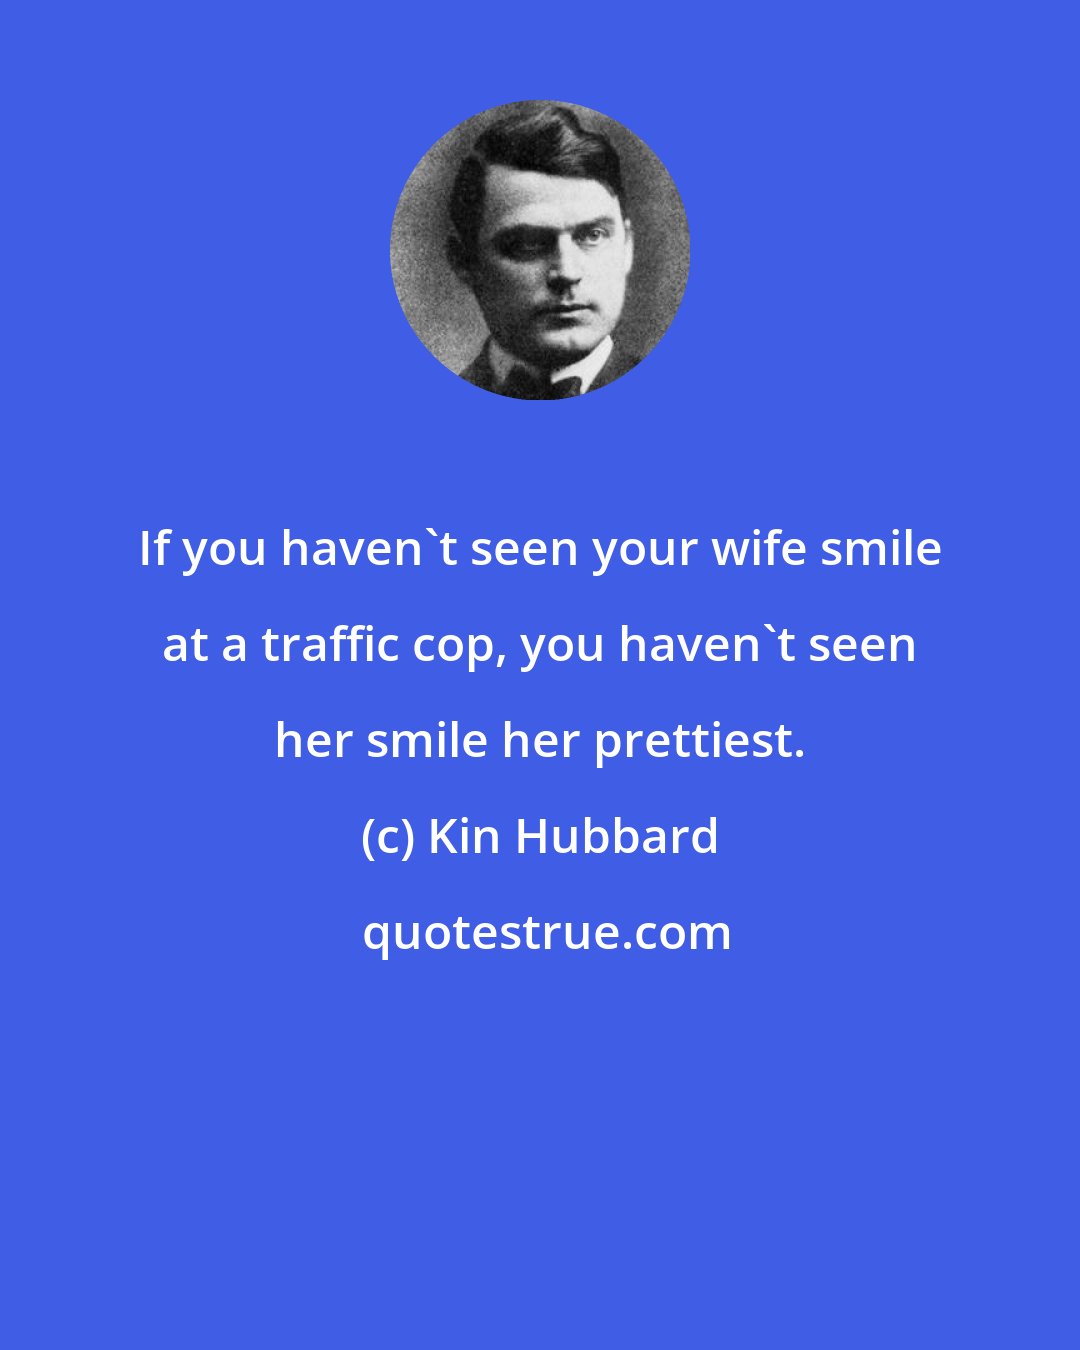 Kin Hubbard: If you haven't seen your wife smile at a traffic cop, you haven't seen her smile her prettiest.